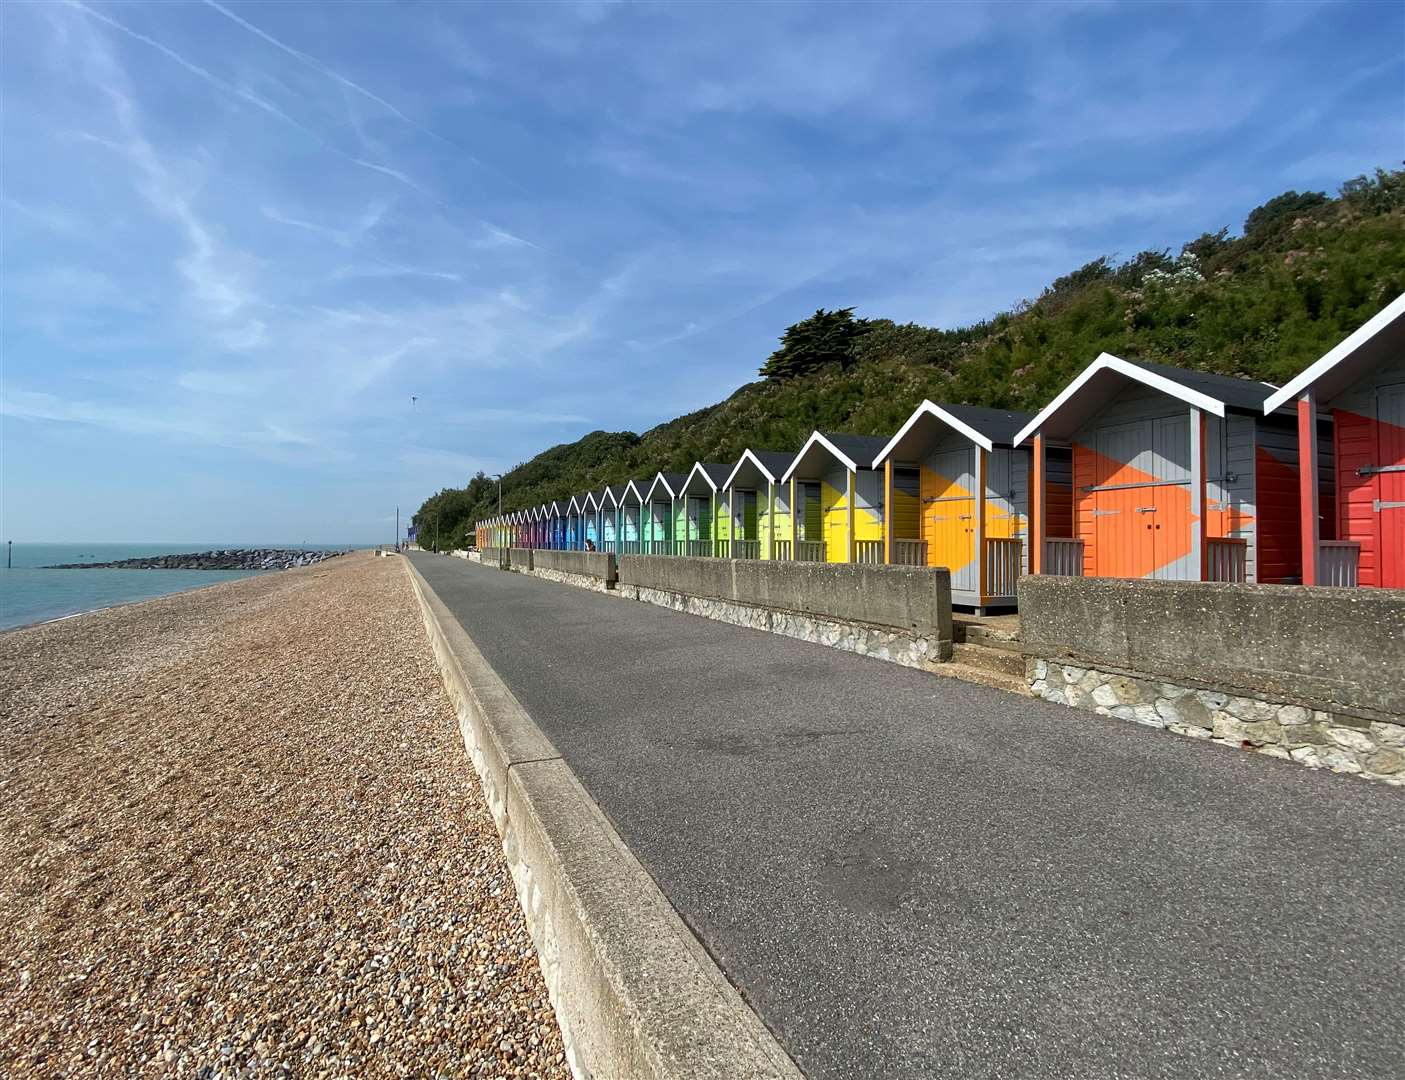 Folkestone & Hythe saw one of the smallest population increases in the county